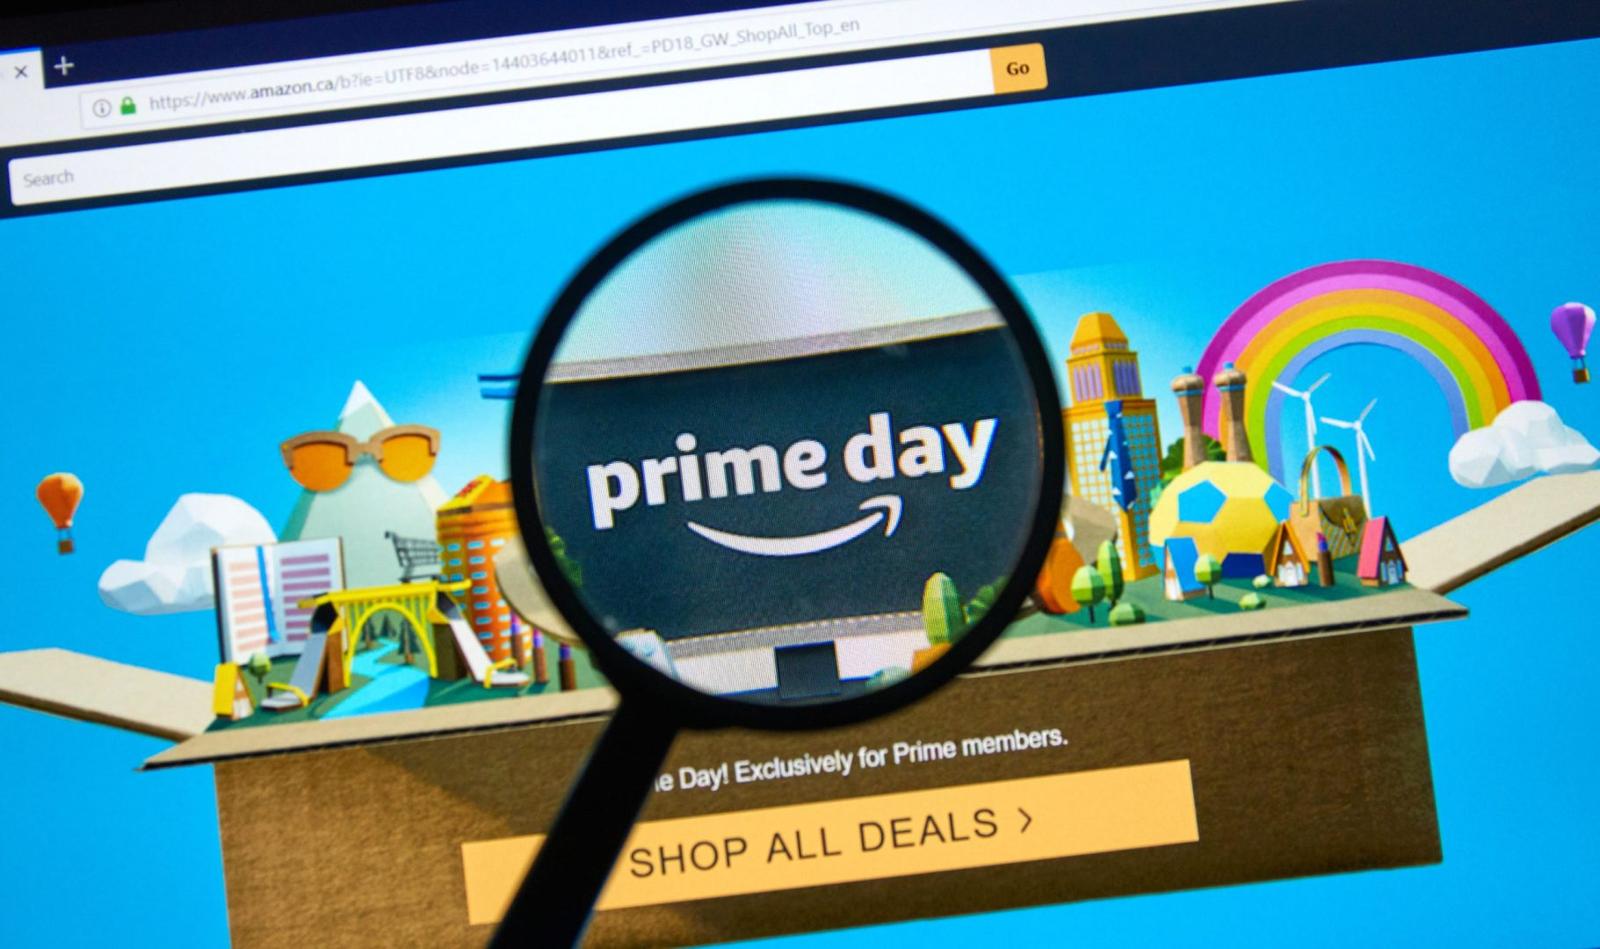 Amazon Prime Day Is Coming, and So Are These 6 Common Amazon Scams!